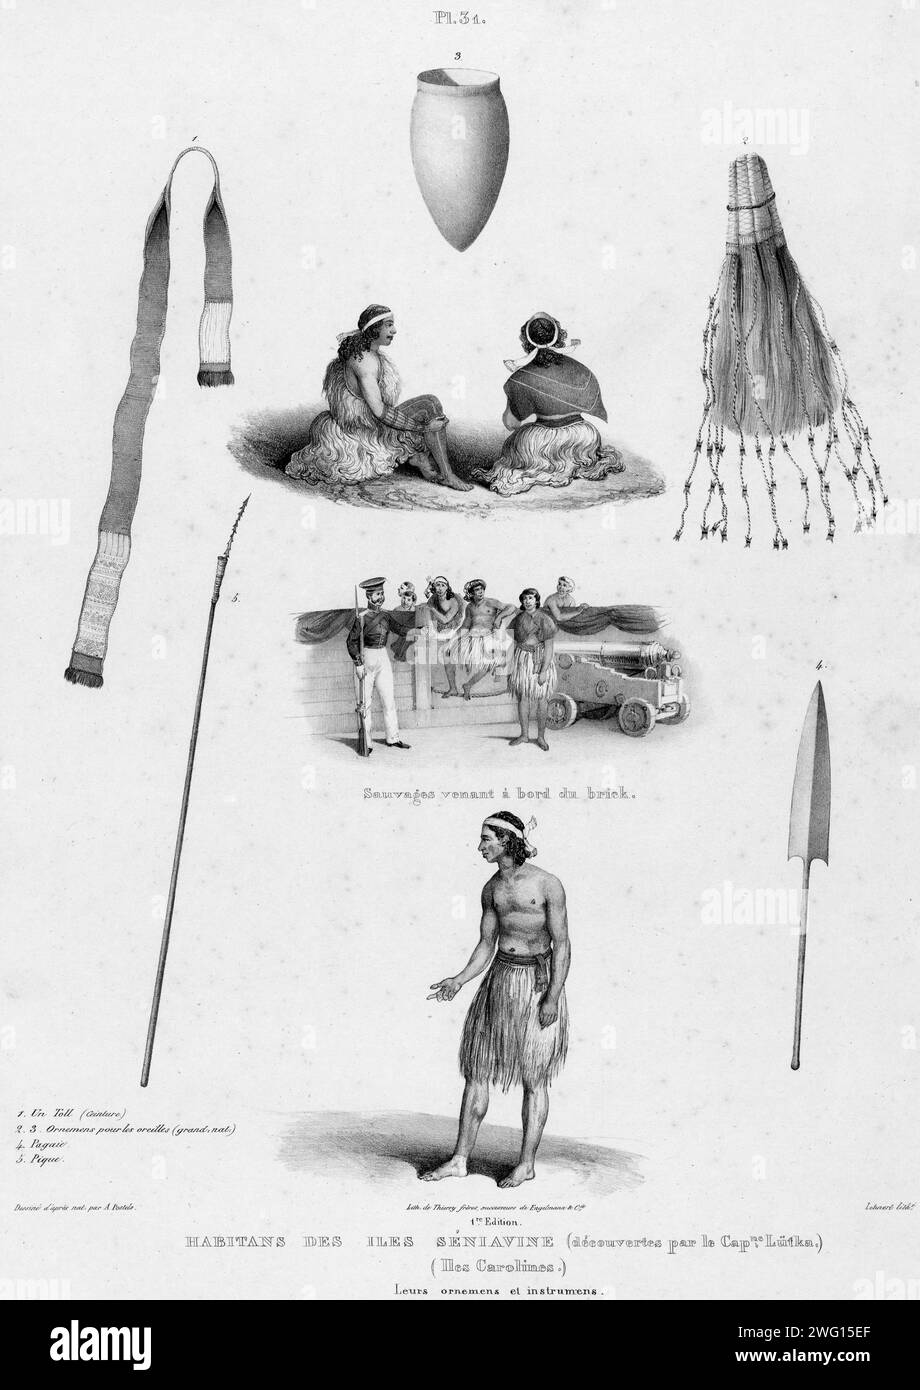 Inhabitants of the Seniavine Islands (discovered by Capt Lutka) (Caroline Islands) their ornaments and instruments, 19th century. One of 65 lithographs that were included in the volume of maps published after the round-the-world voyage of the corvette Seniavin commissioned by Tsar Nicholas I and carried out in 1826-29 under the command of Captain Fedor Litke (the Russian version of the name of Count Friedrich Lu&#xa8;tke, a Baltic German). The expedition began in Kronstadt (the main imperial Russian naval base near Saint Petersburg where Russian circumnavigations typically began and ended); it Stock Photo